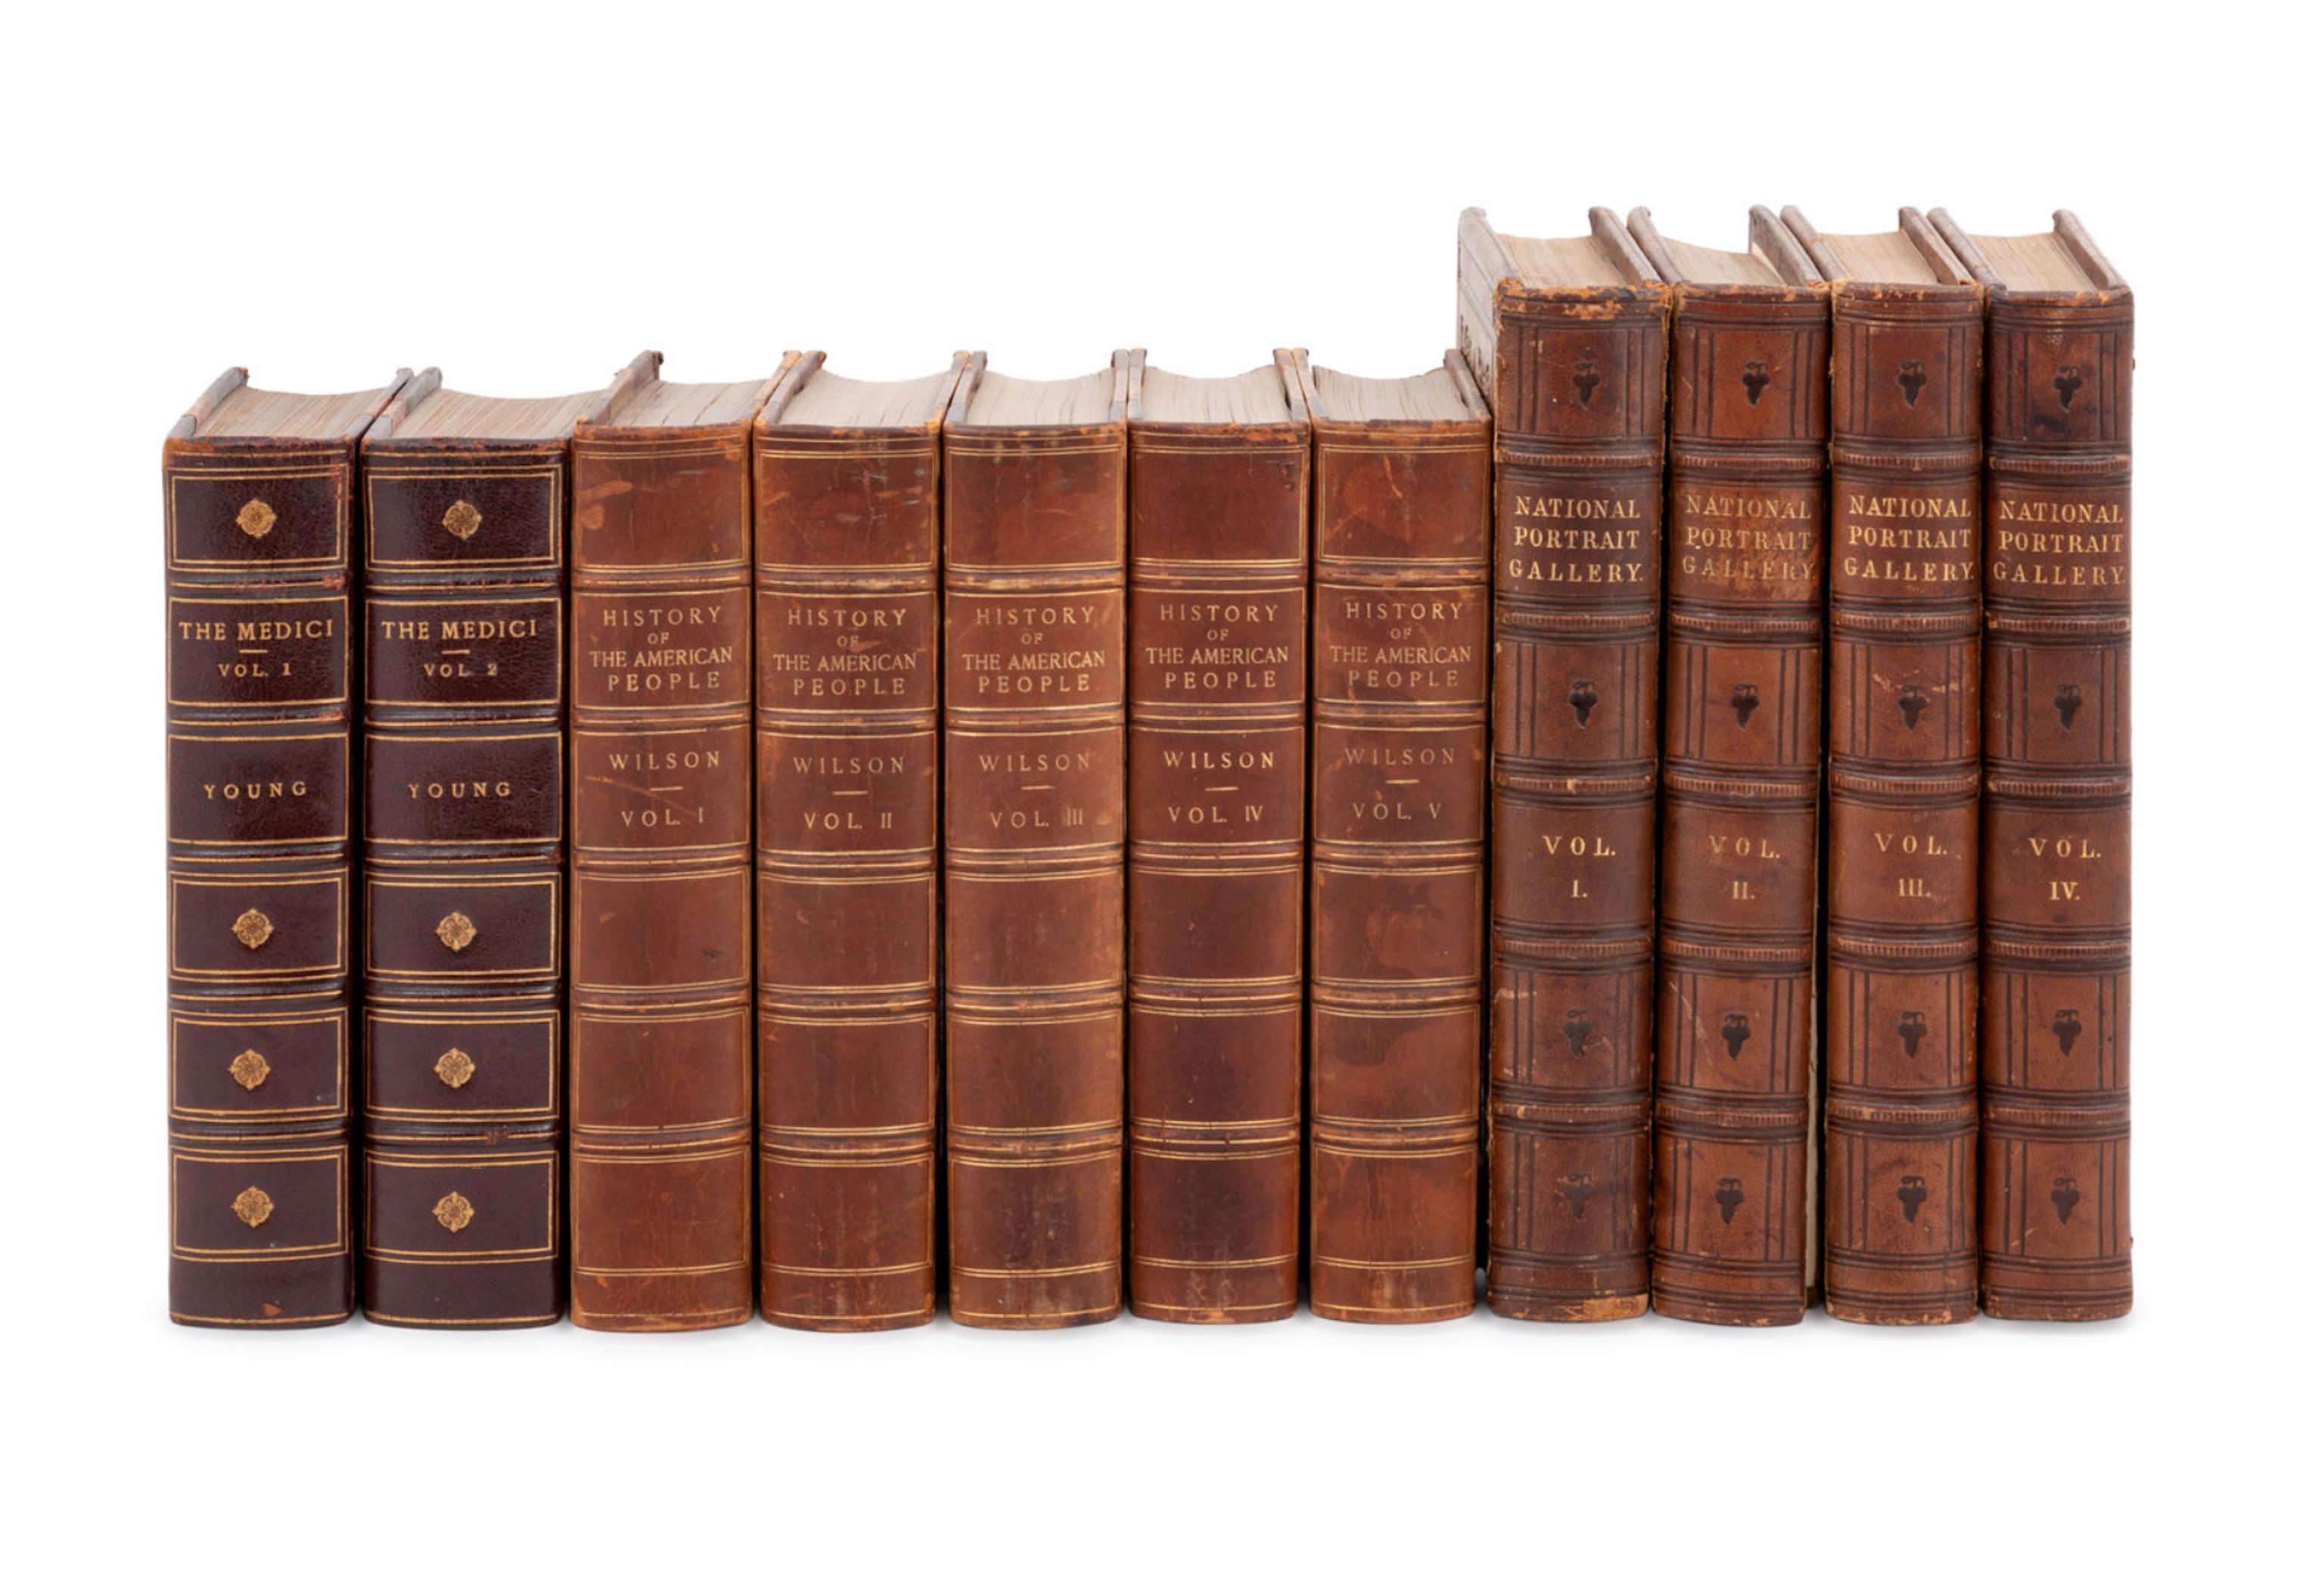 19th Century New Shipment of over 200 Leather Bound Books in English, Photo's Are of Sets For Sale